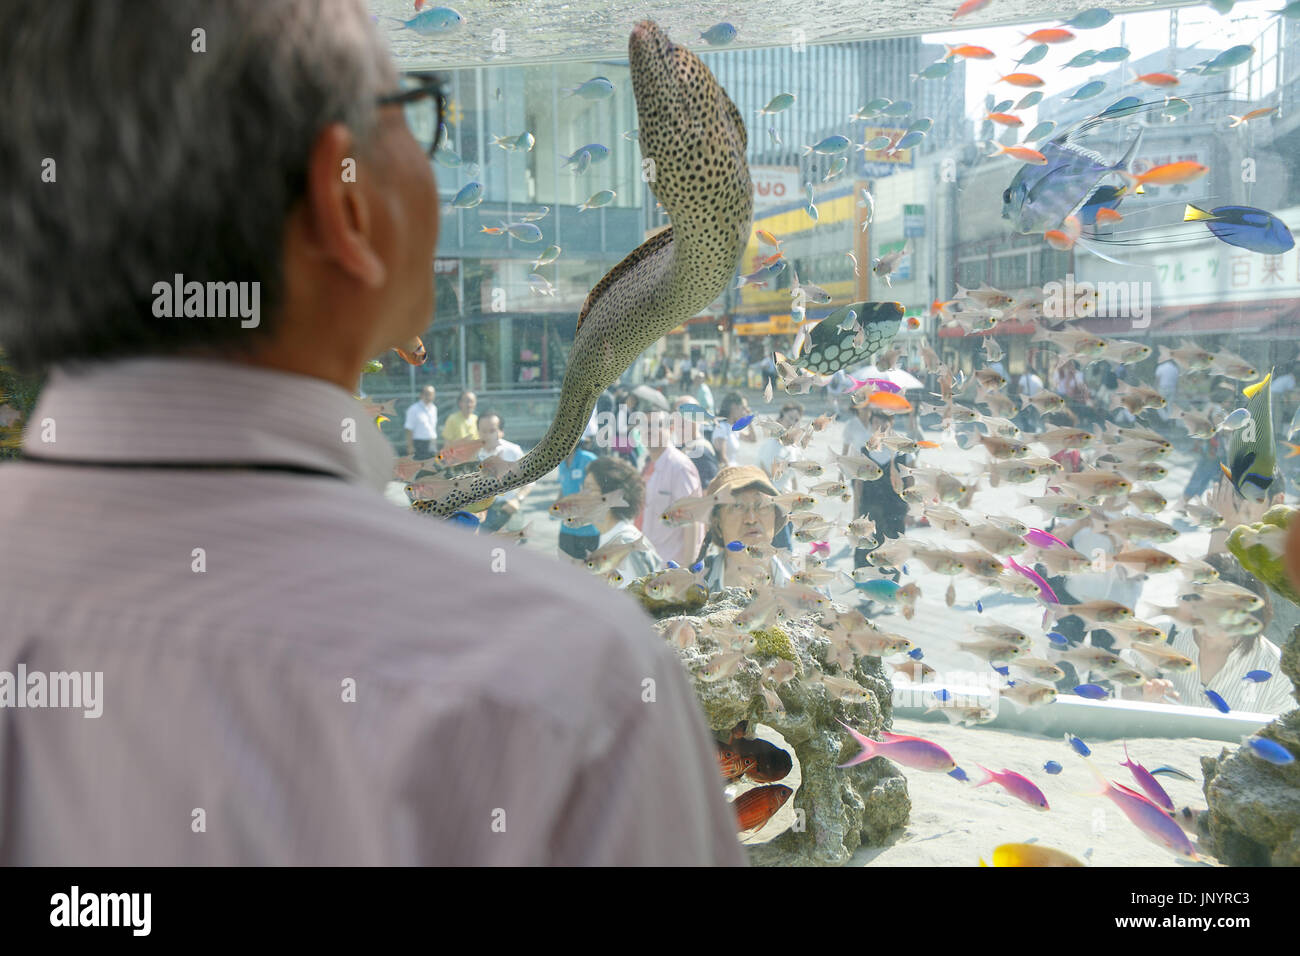 Tokyo, Japan. 31st July, 2017. A man looks at a Black-spotted moray from Okinawa swimming in a huge fish tank set up in Yurakucho on July 31, 2017, Tokyo, Japan. ''Sony Aquariums'' are set up in front of Yurakucho station and at Sony Showroom/Sony Store, showcasing different marine animals from the Okinawa Churaumi Aquarium including Napoleon wrasse and Black-spotted moray. Credit: Rodrigo Reyes Marin/AFLO/Alamy Live News Stock Photo